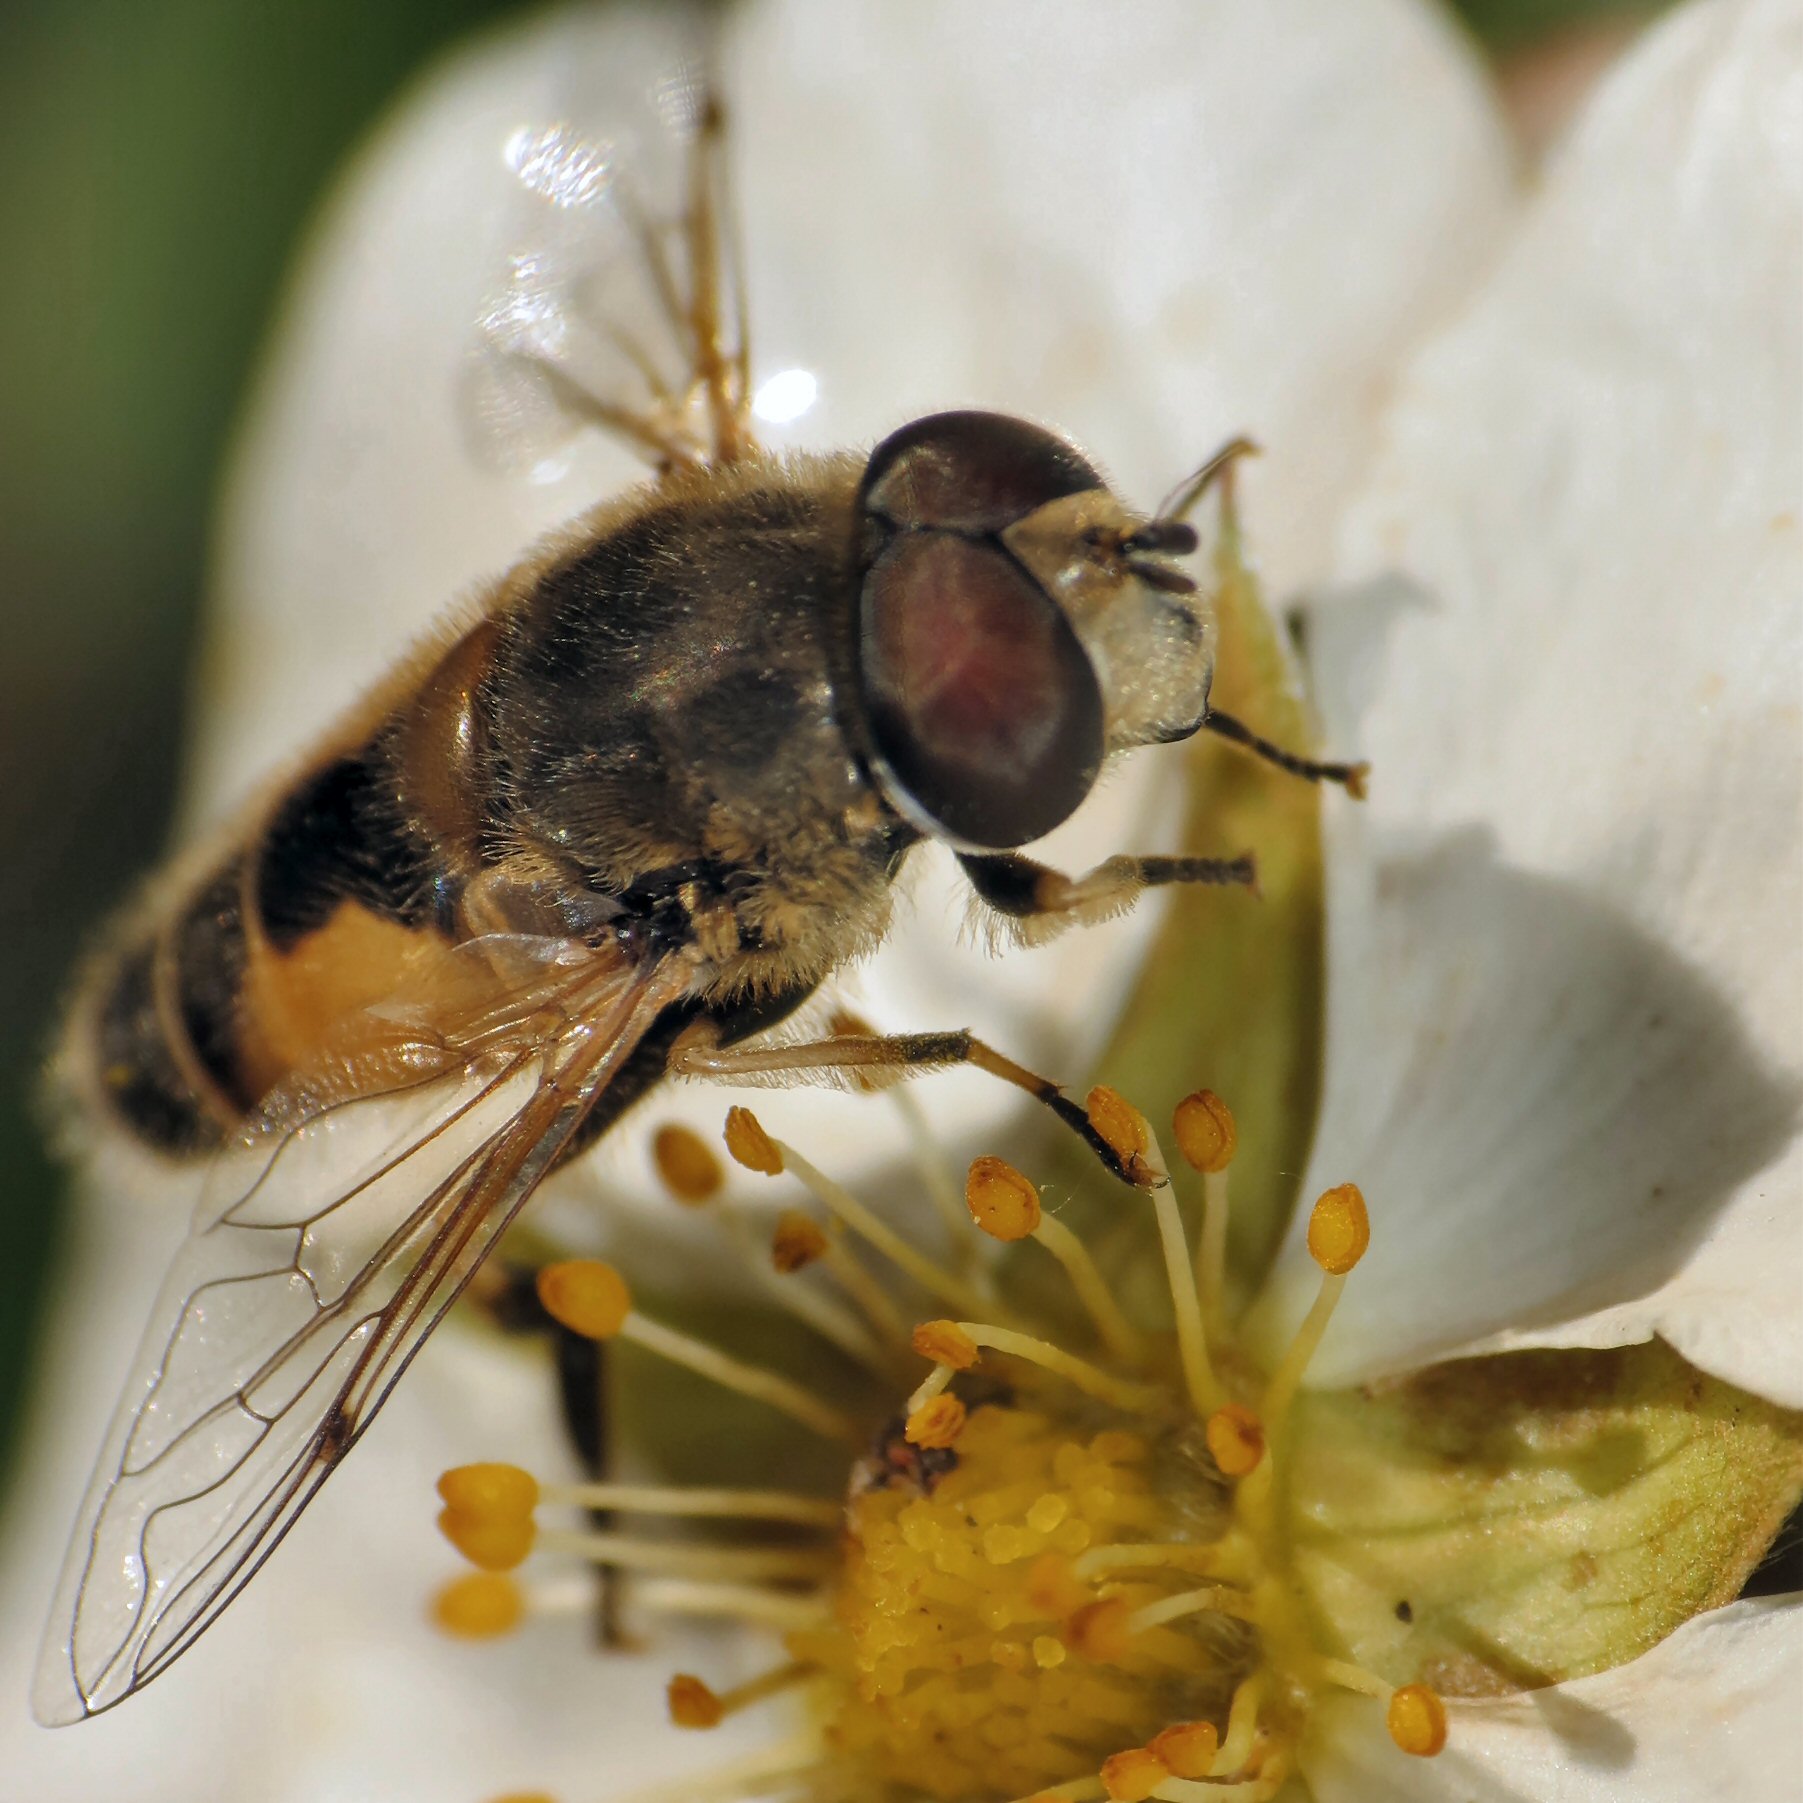 a bee with a long antennae sitting on a white flower